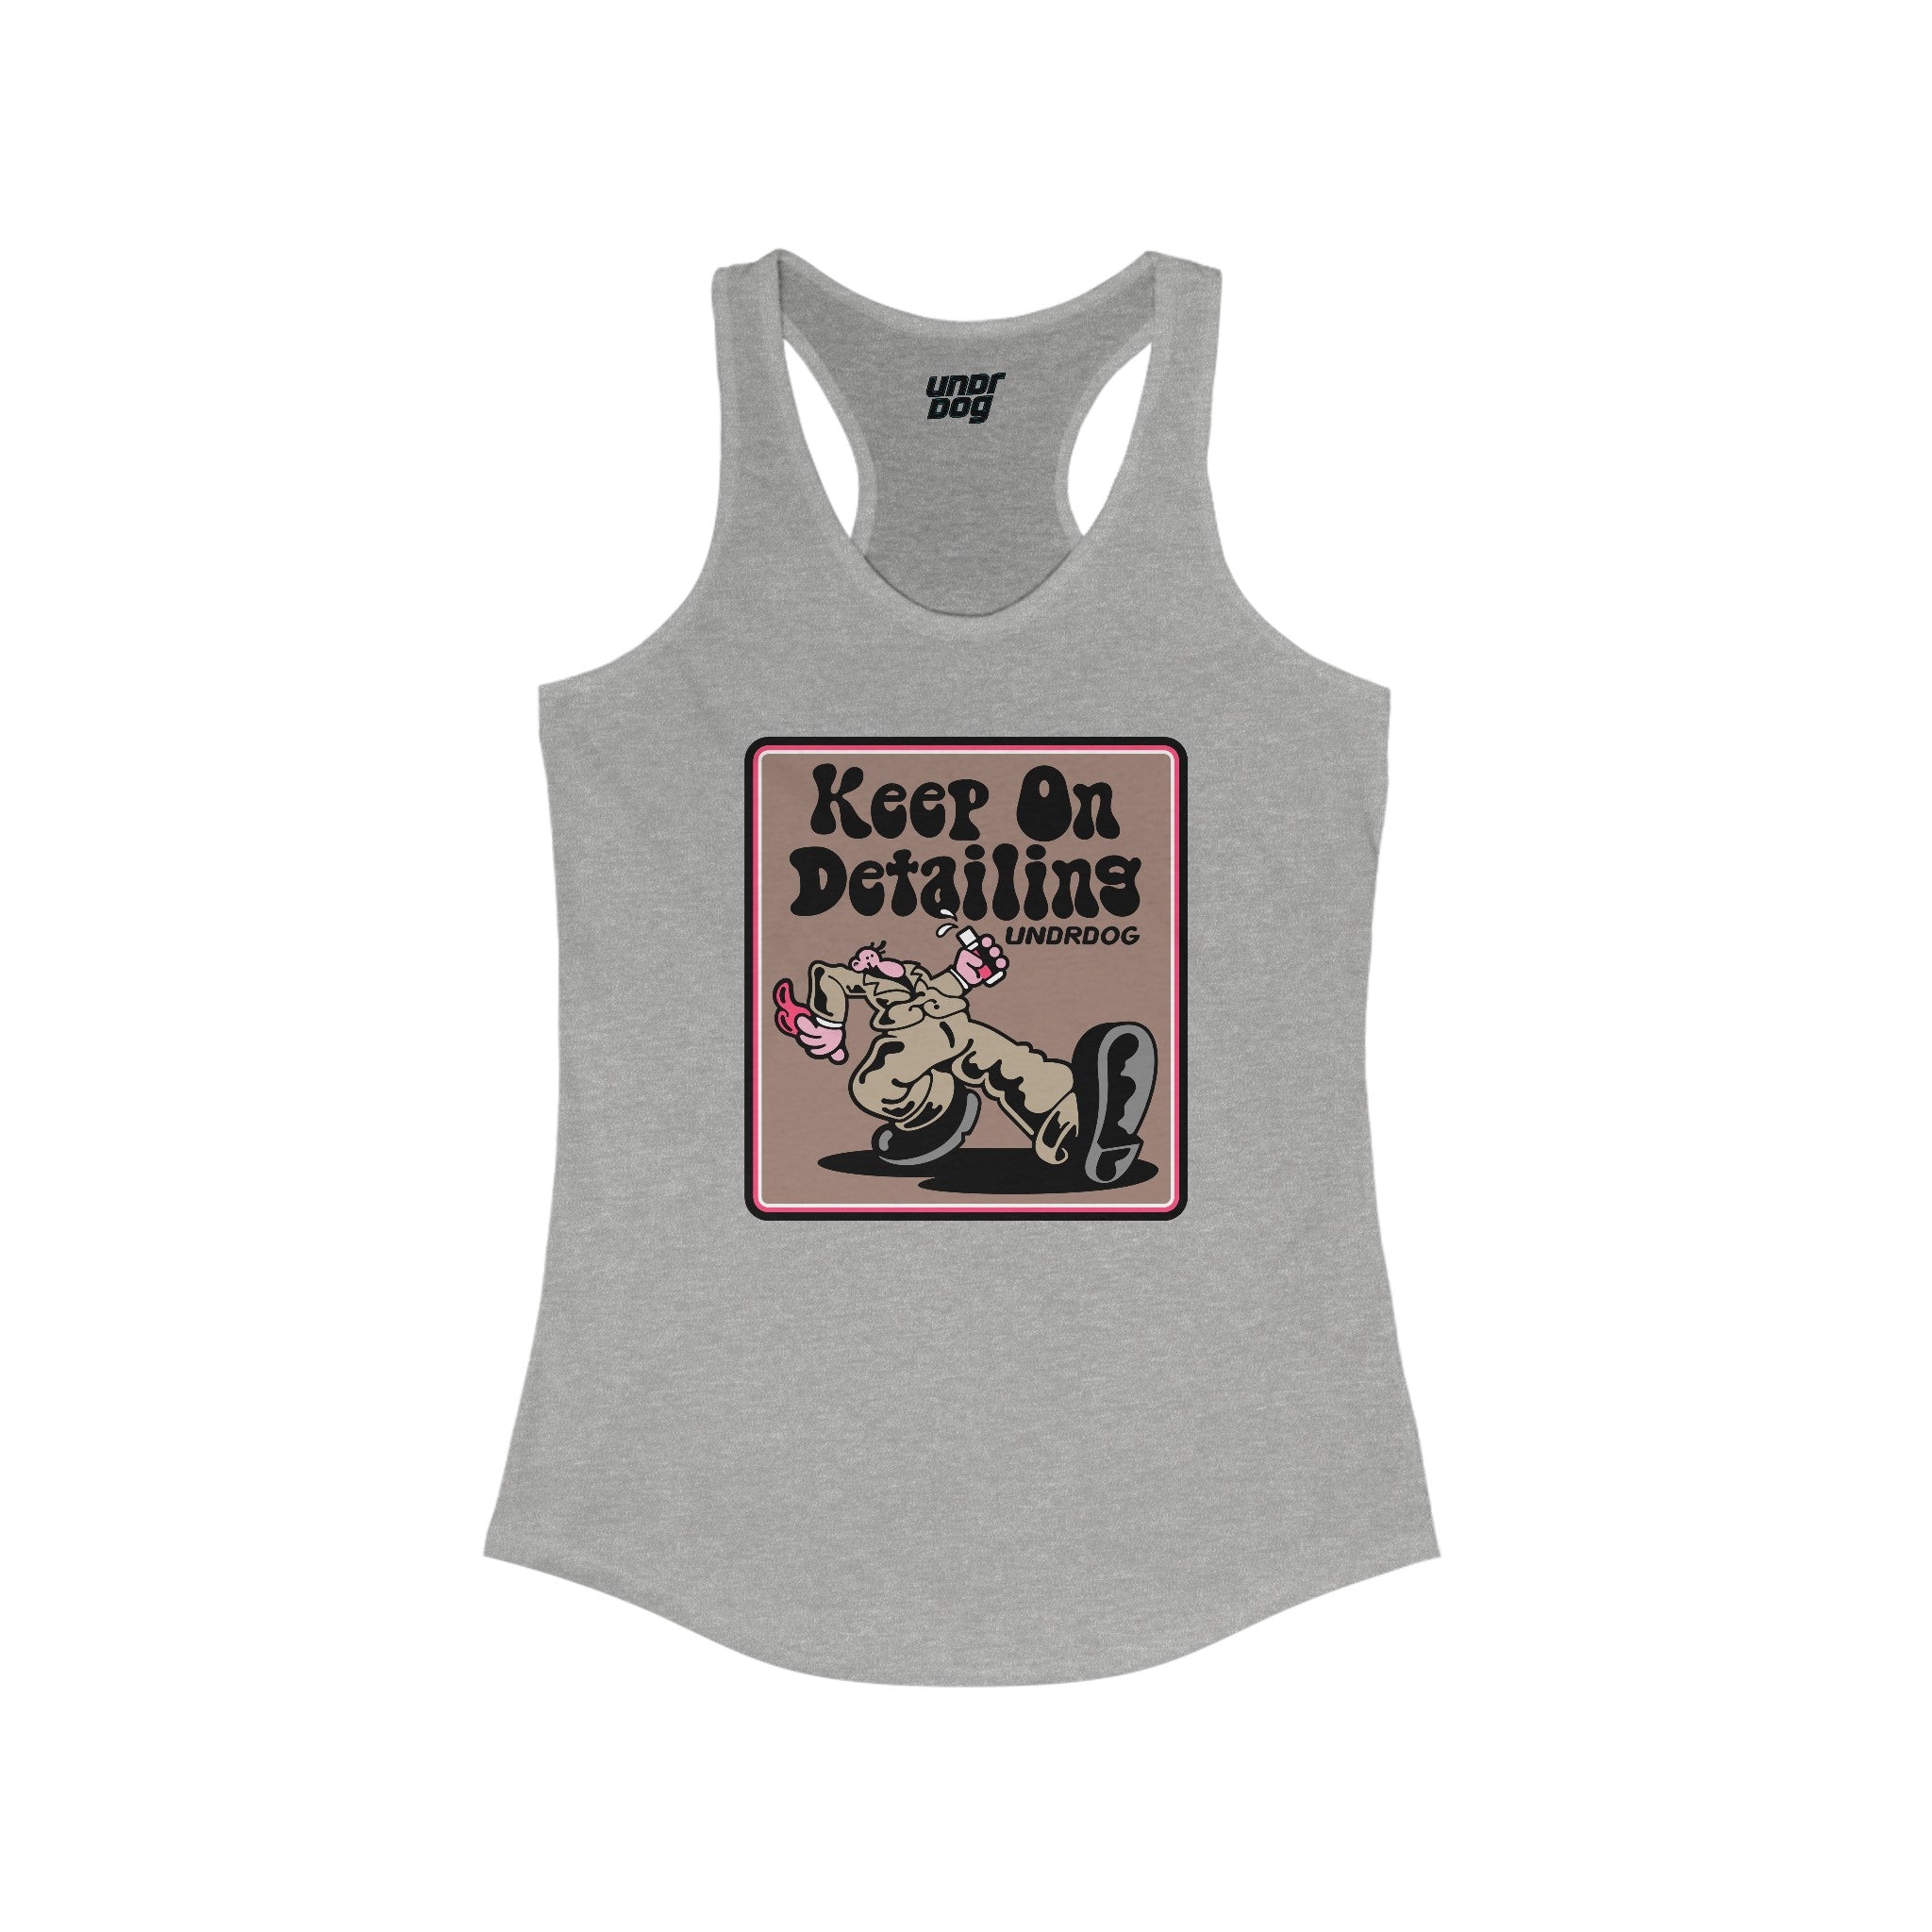 2271494604343546726_2048.jpg - Keep on Detailing v2 Women's Tank - Undrdog Surface Products